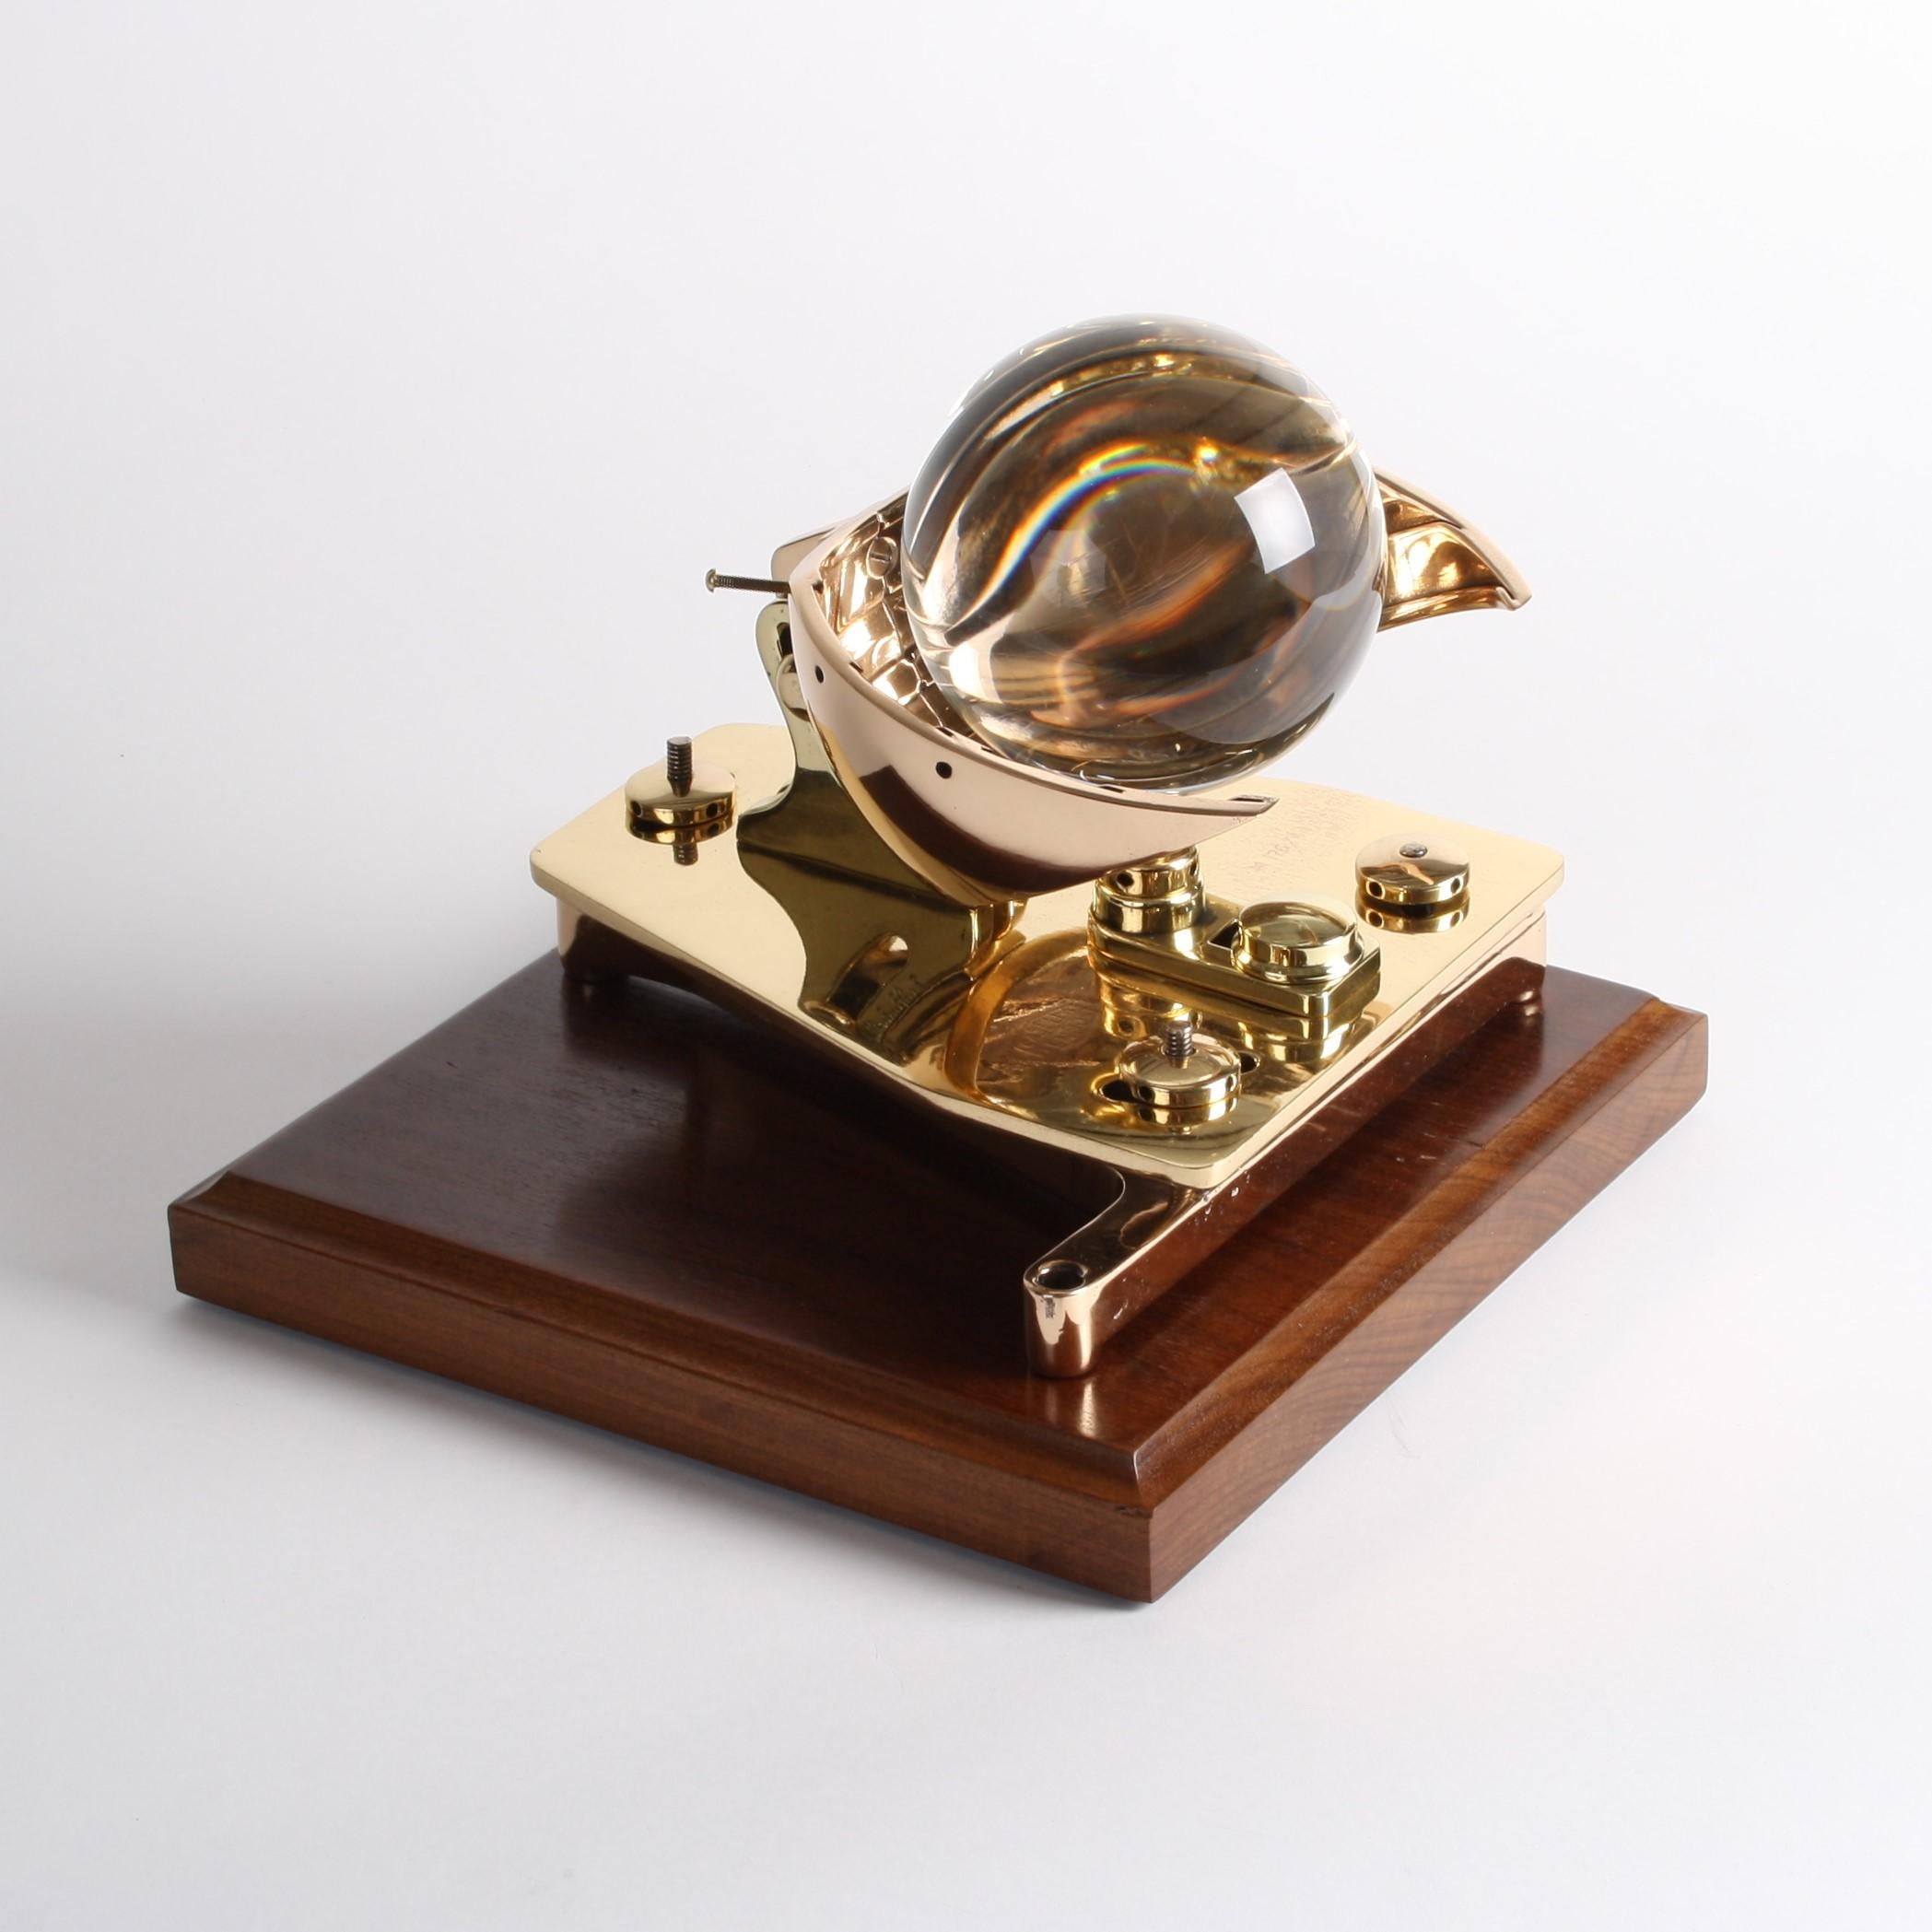 A campbell–stokes sunshine recorder by Casella of London.

Dated 1944. 

Marked with the Casella logo and M 176/44

The Campbell–Stokes sphere is used to record sunshine.

On a later hardwood display board 10 x 9 3/4 inches.

It was